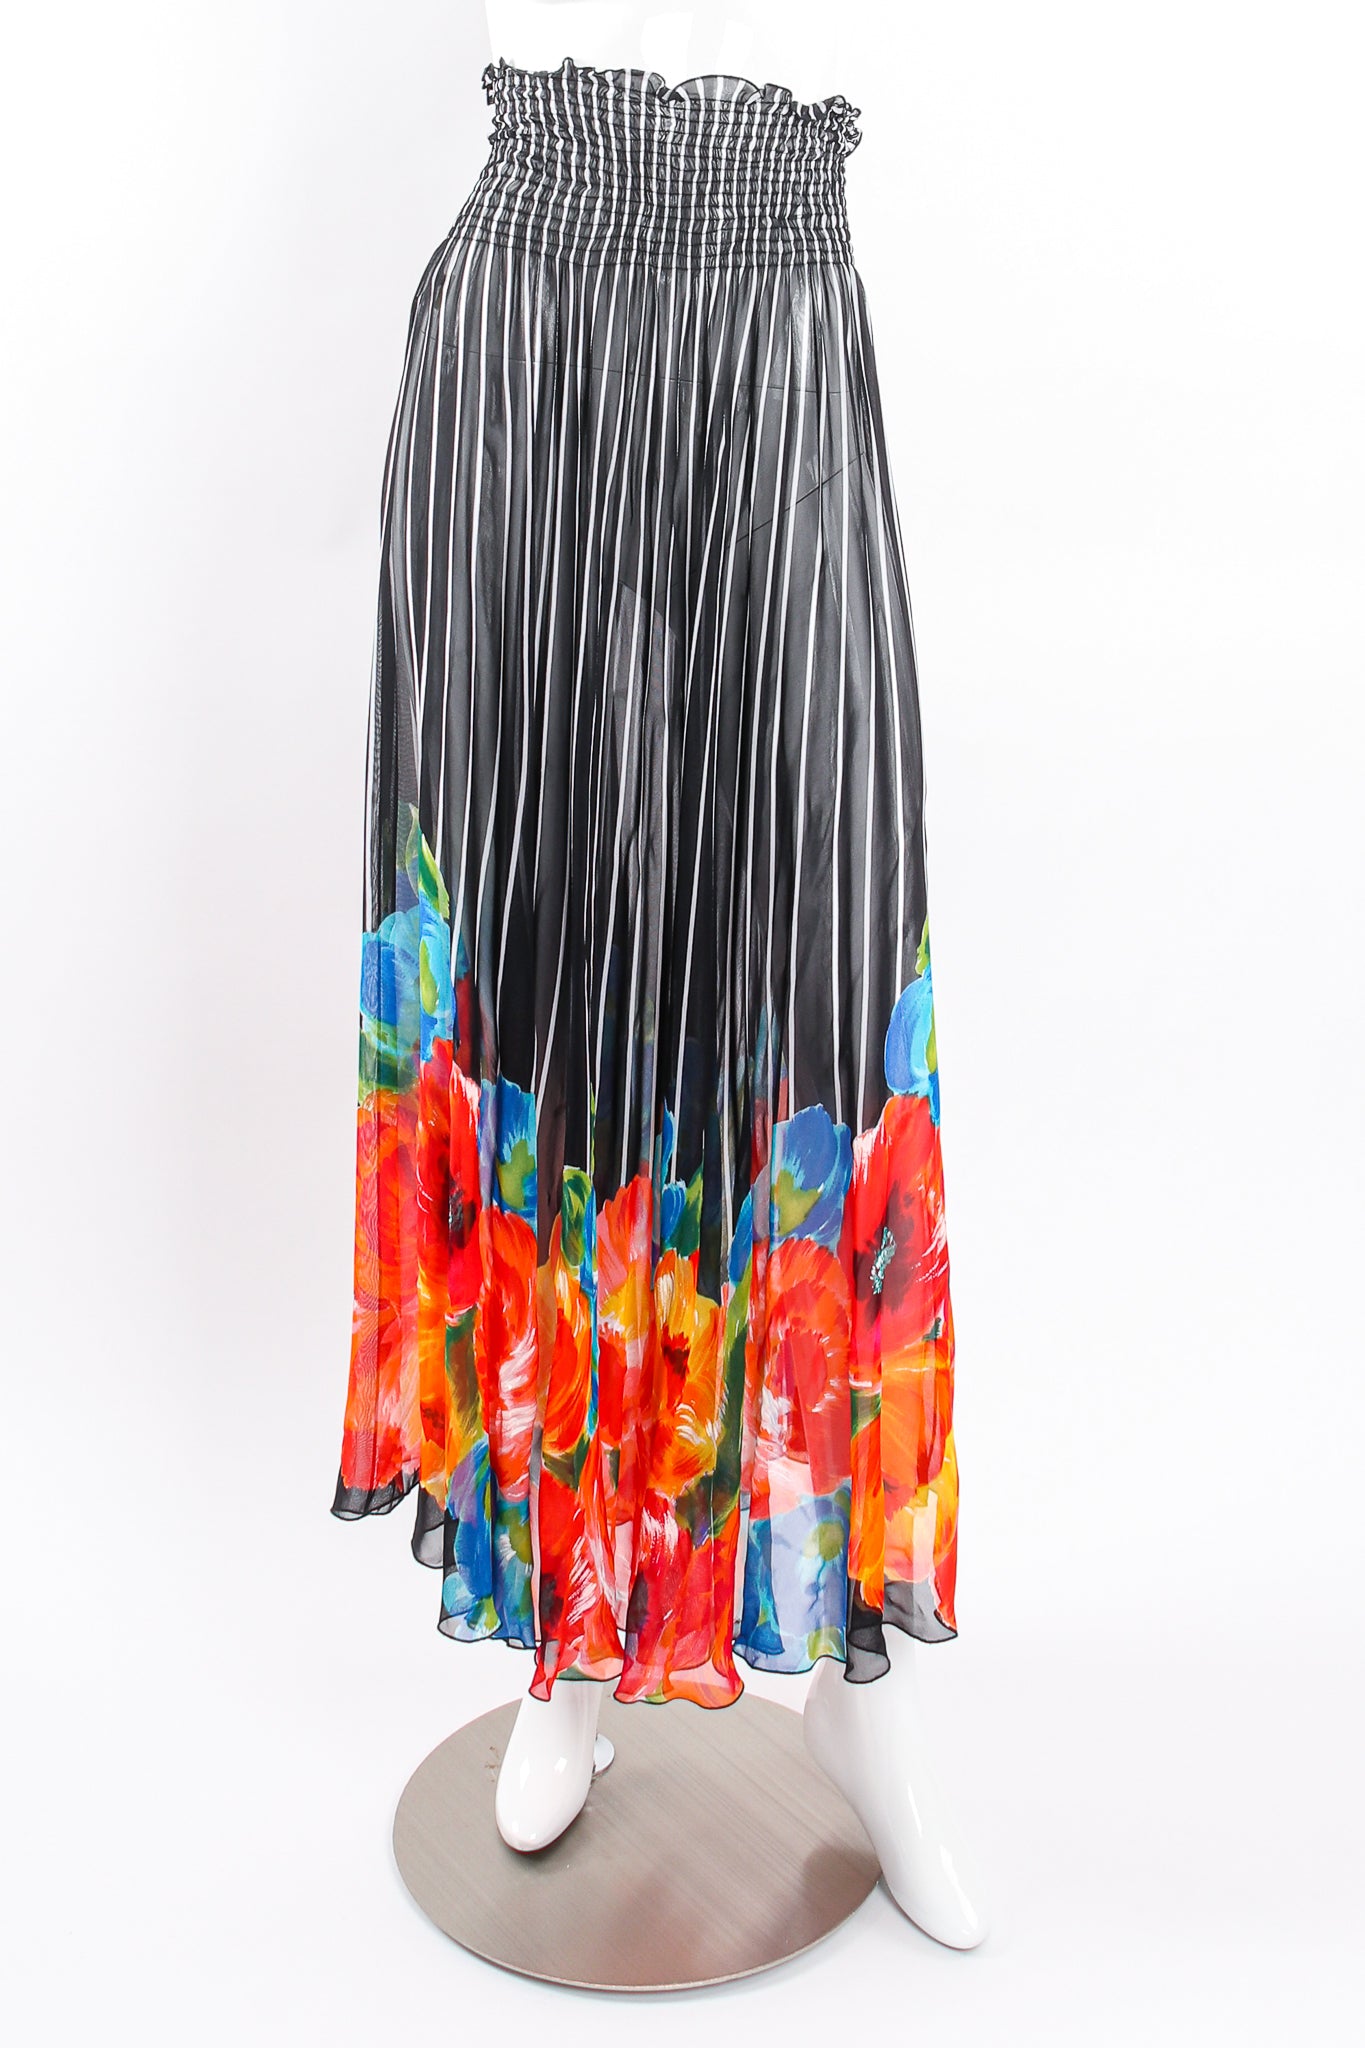 Vintage Gottex Chiffon Sheer Striped Floral Coverup Skirt on Mannequin front at Recess LA